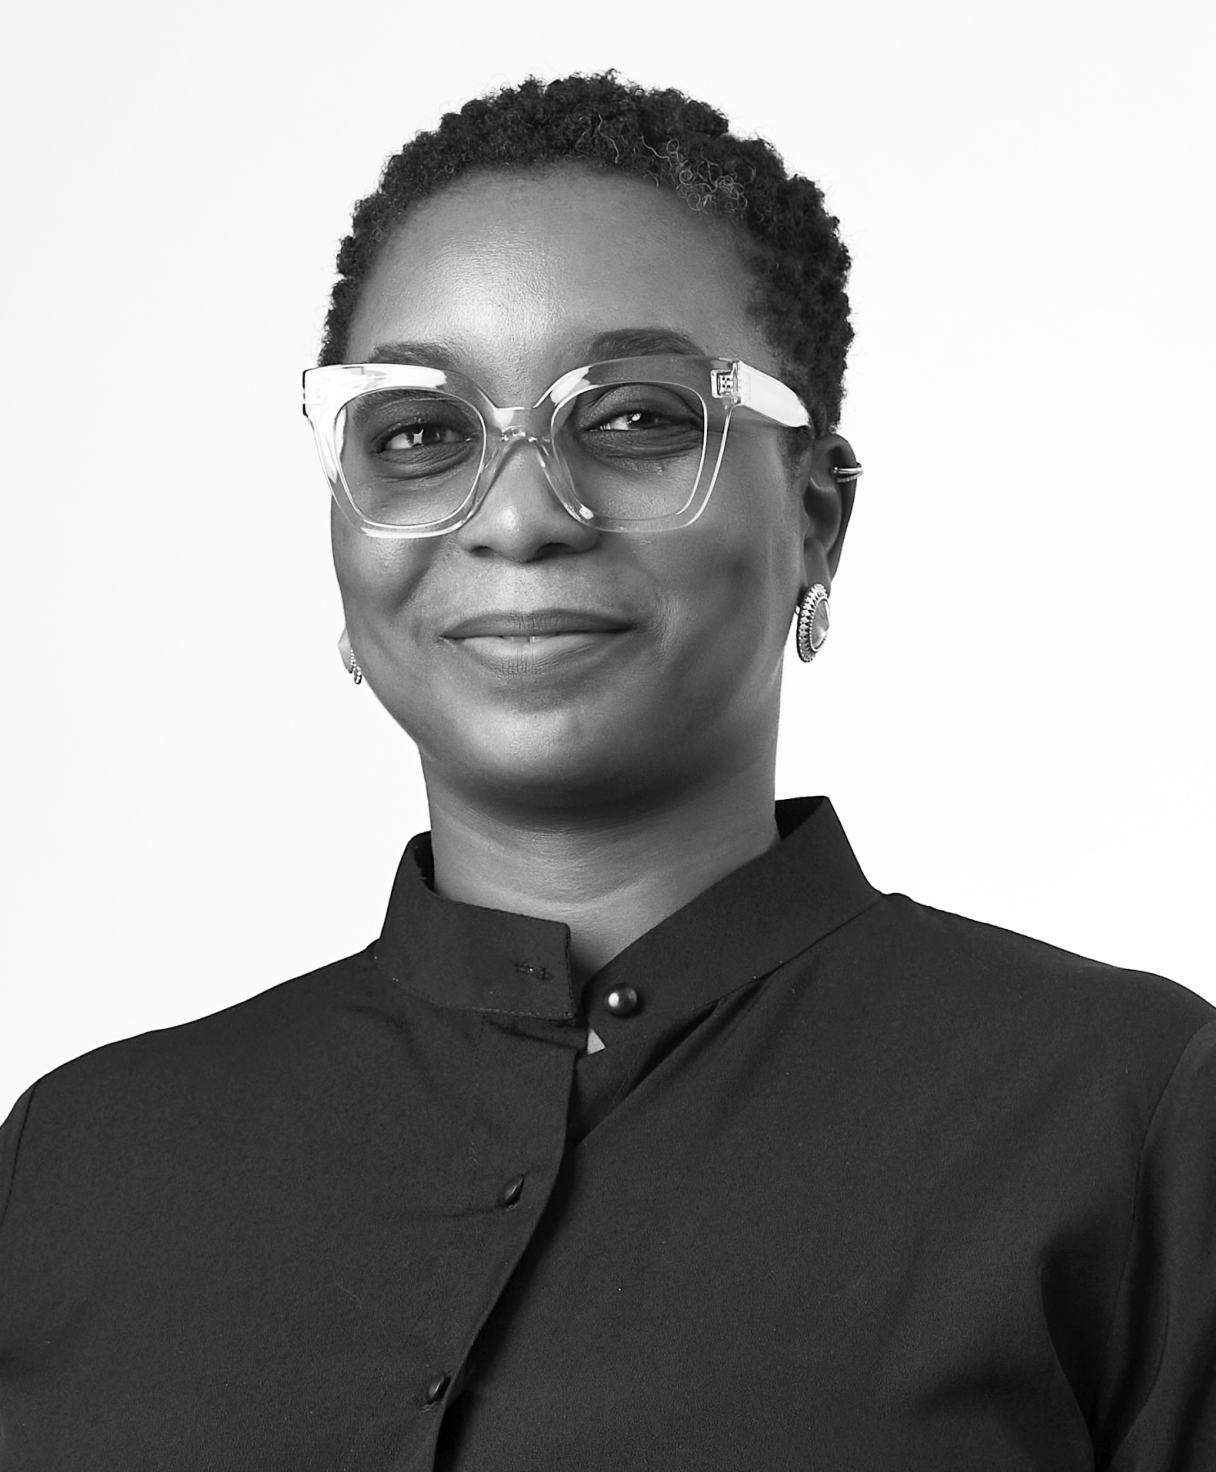 Black and white portrait of OBIAMAKA OFODILE as part of the Oshinowo Studio team picture